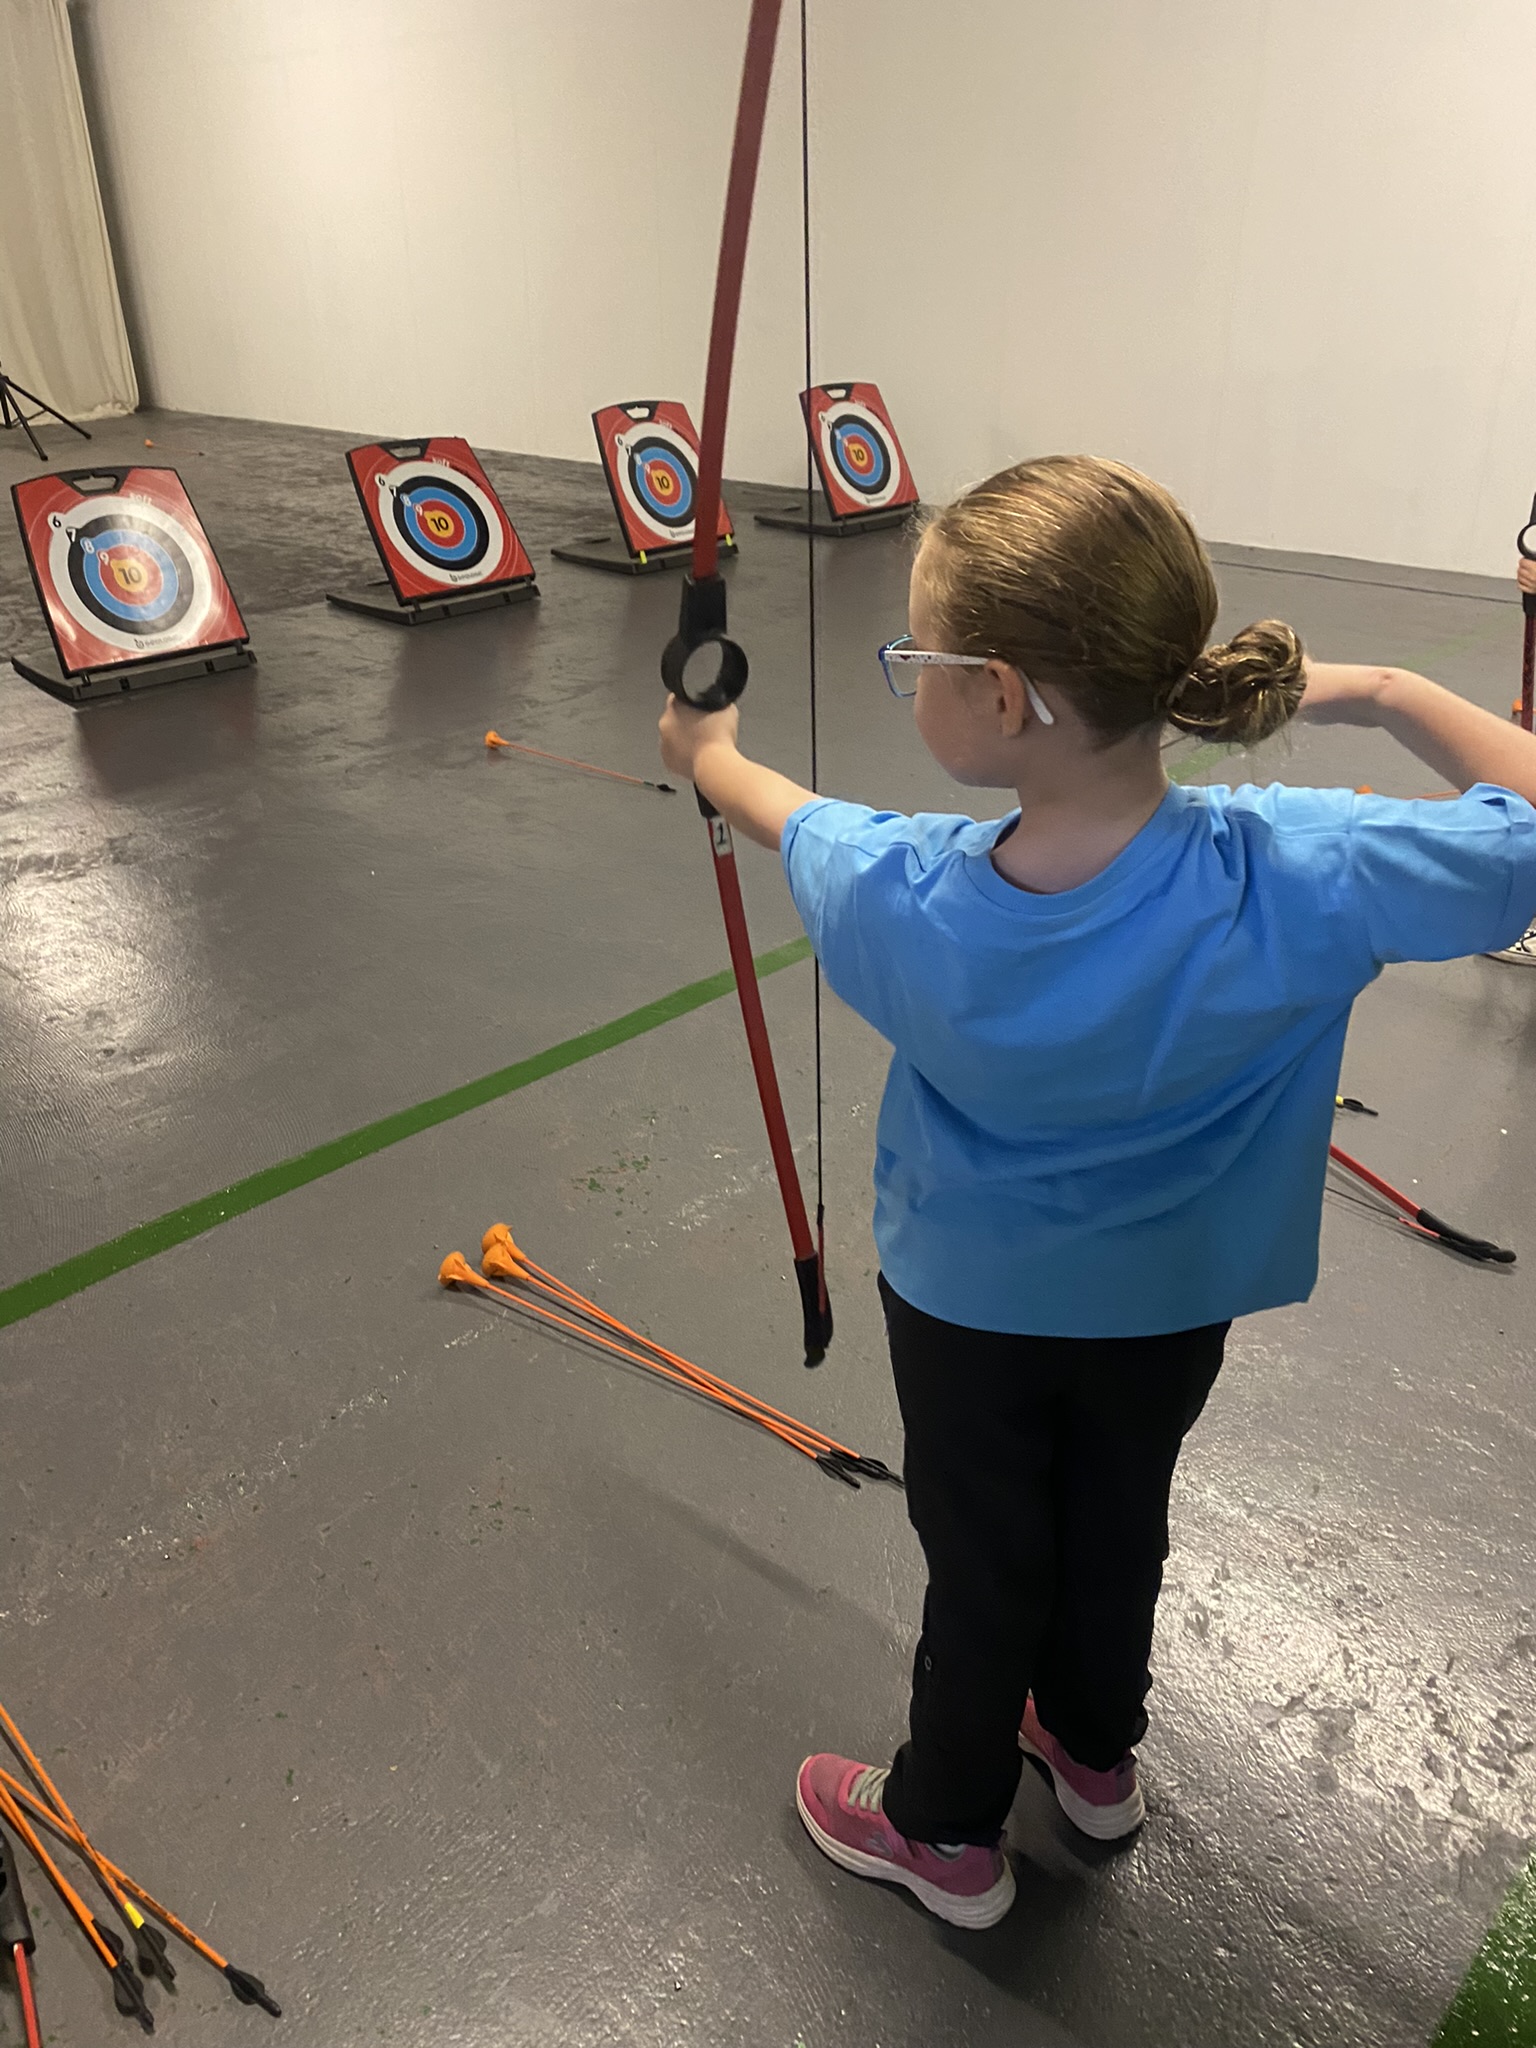 Ella is trying archery. She is stood indoors while holding a bow and soft archery arrow. The bow's pointed at the target and Ella is about to let go of the arrow.